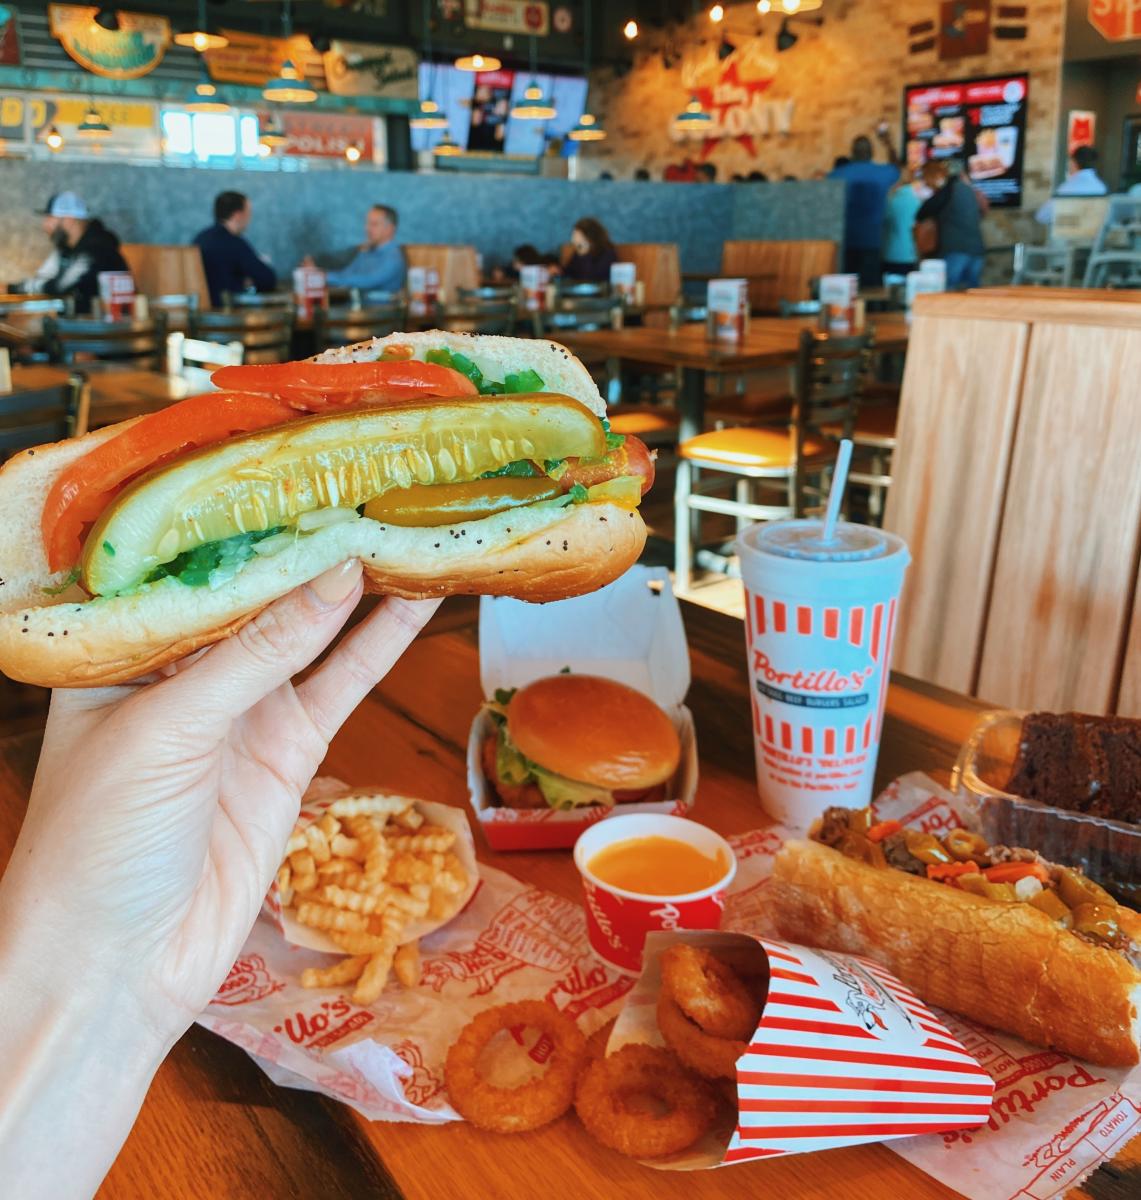 Beloved ChicagoBased Portillo’s Has Opened Their First Texas Location